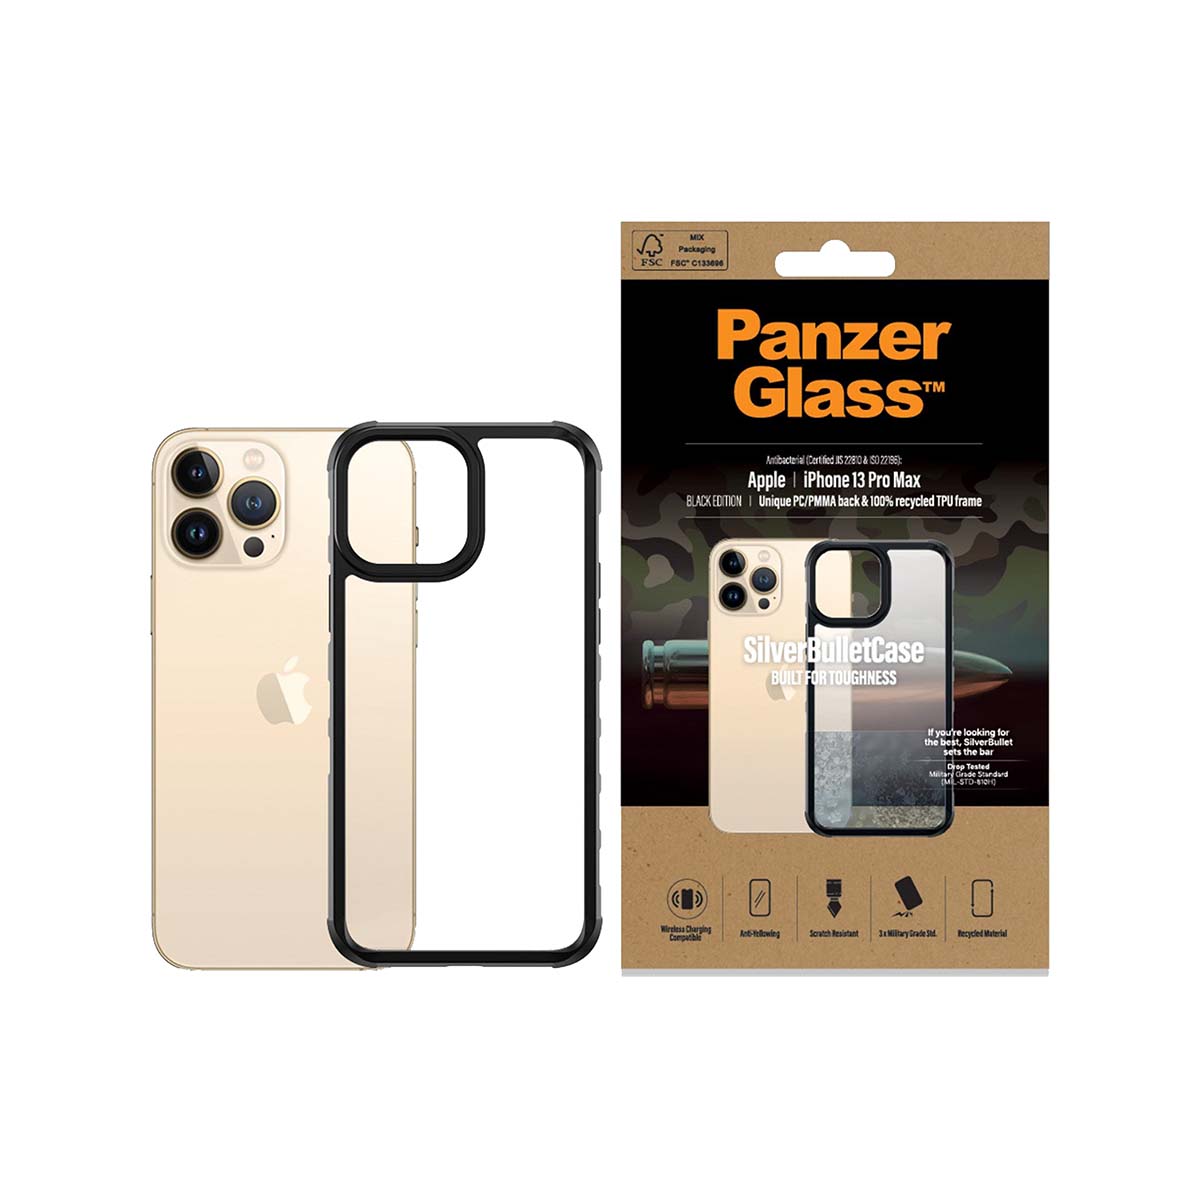 PanzerGlass SilverBullet ClearCase for iPhone 13 Pro Max - Black AB